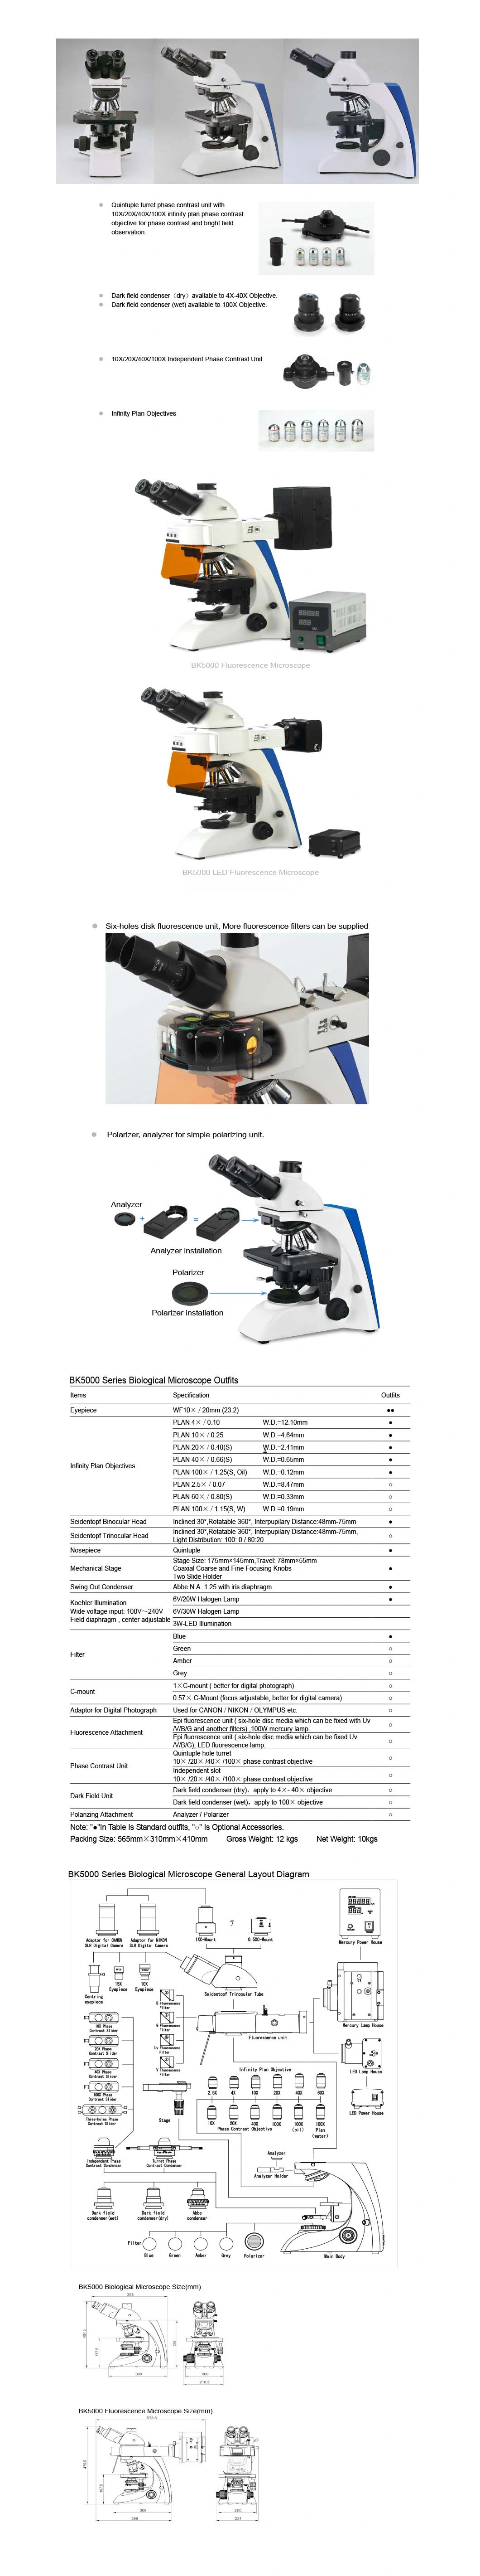 High-Definition Portable Fluorescence Microscope for Medical Instrument